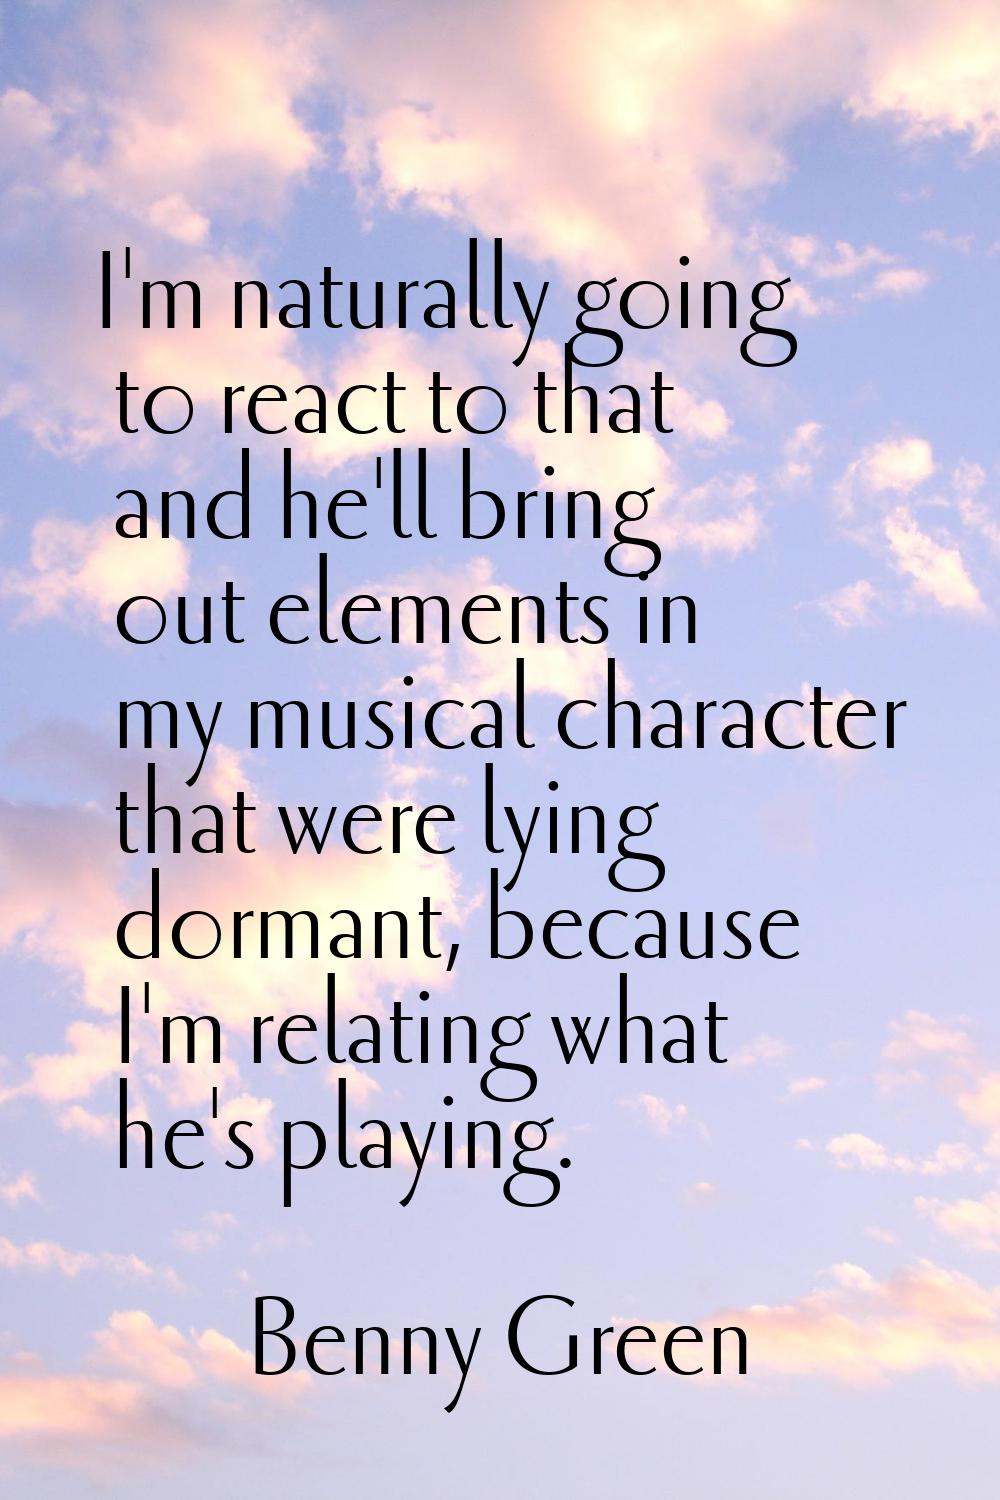 I'm naturally going to react to that and he'll bring out elements in my musical character that were